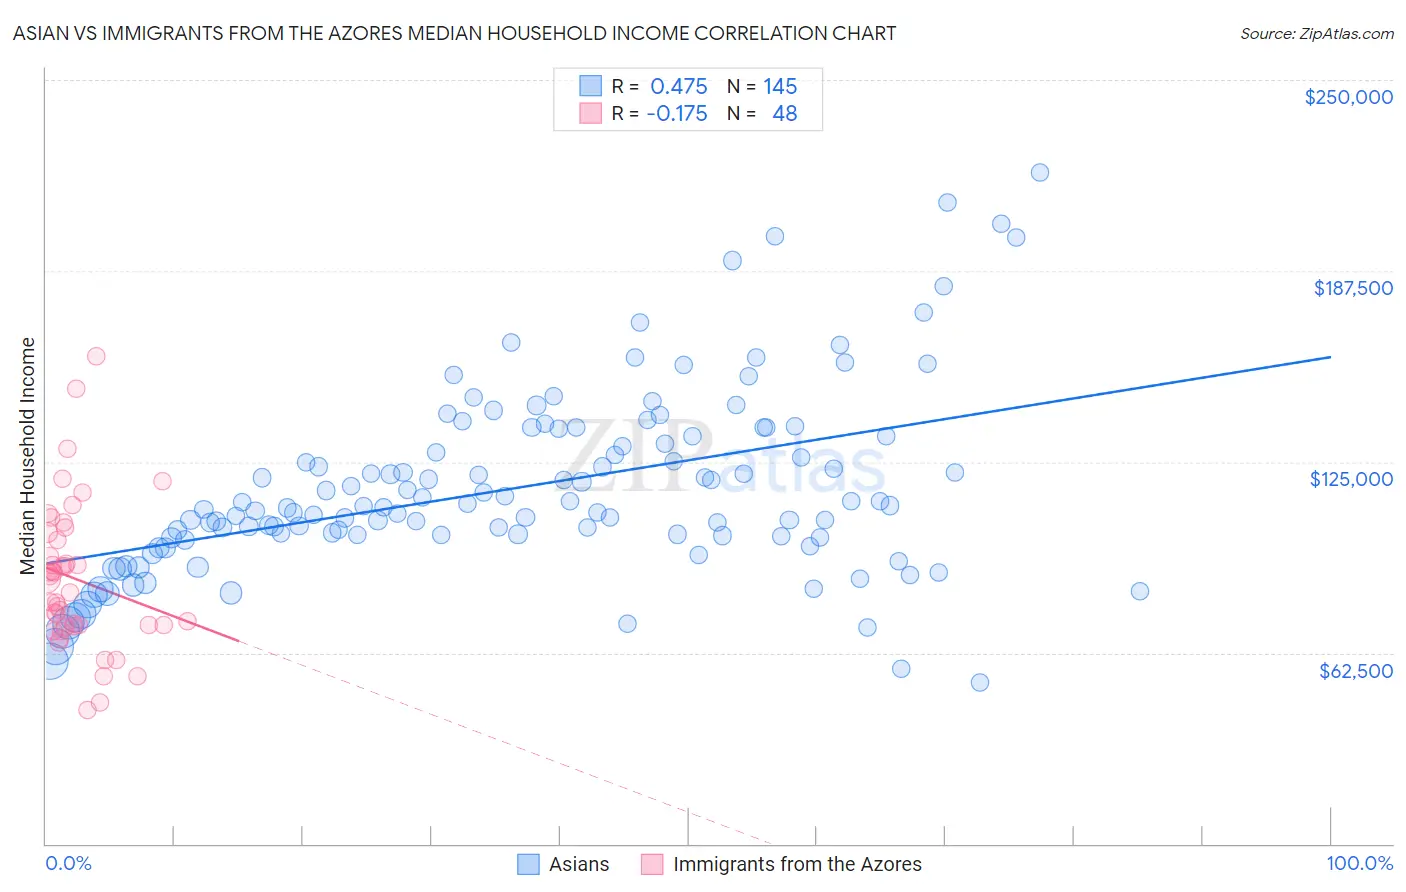 Asian vs Immigrants from the Azores Median Household Income